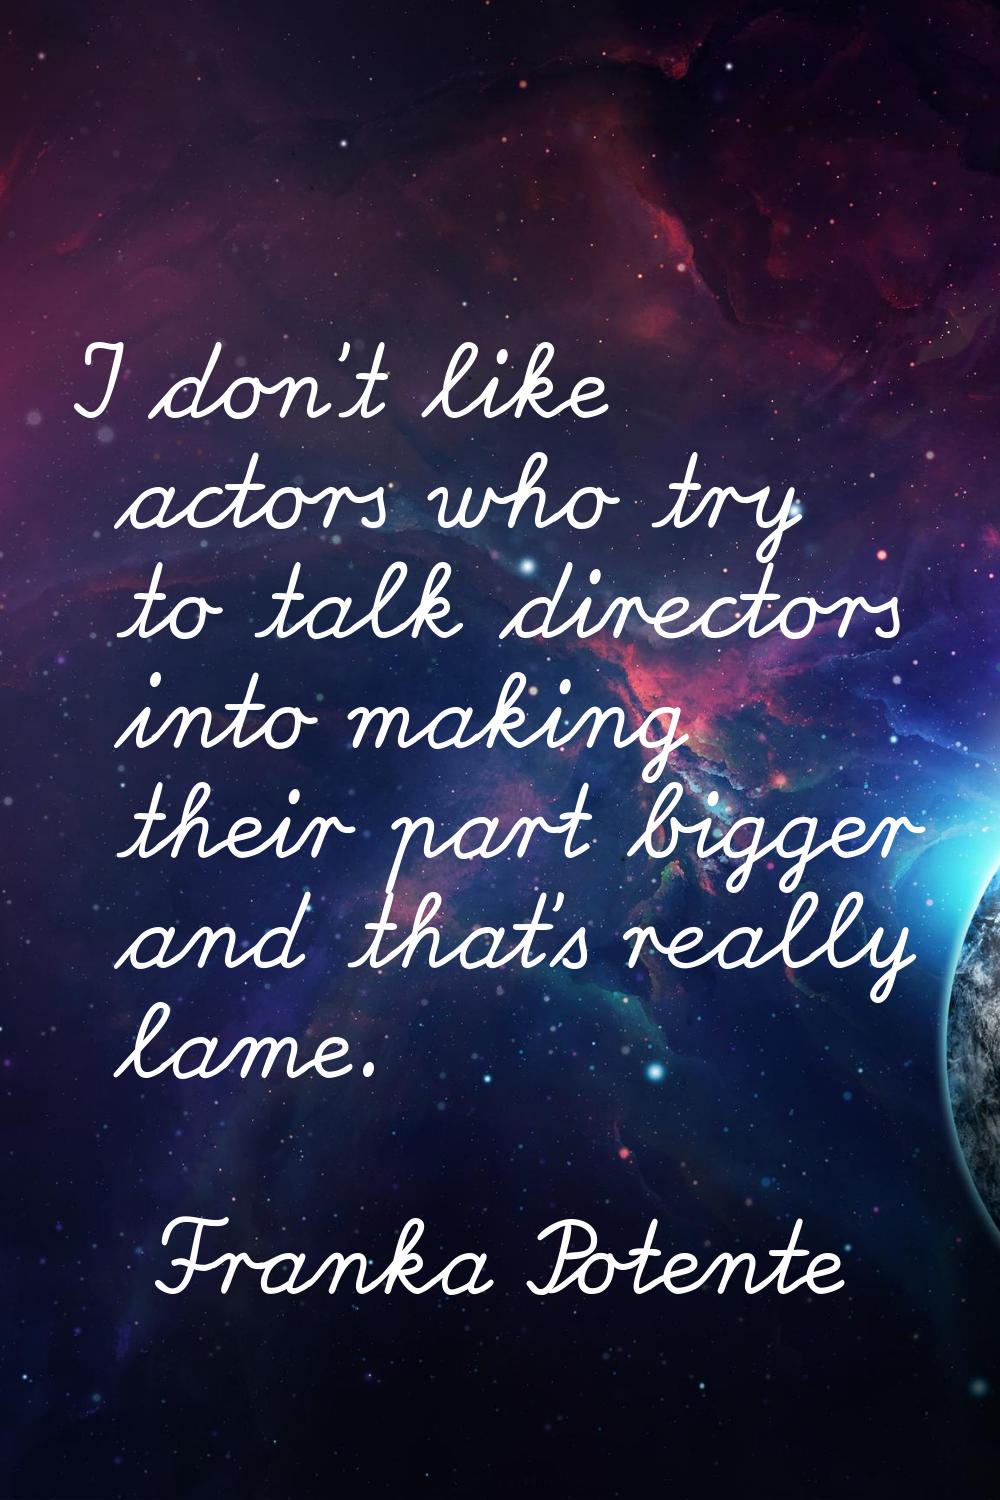 I don't like actors who try to talk directors into making their part bigger and that's really lame.